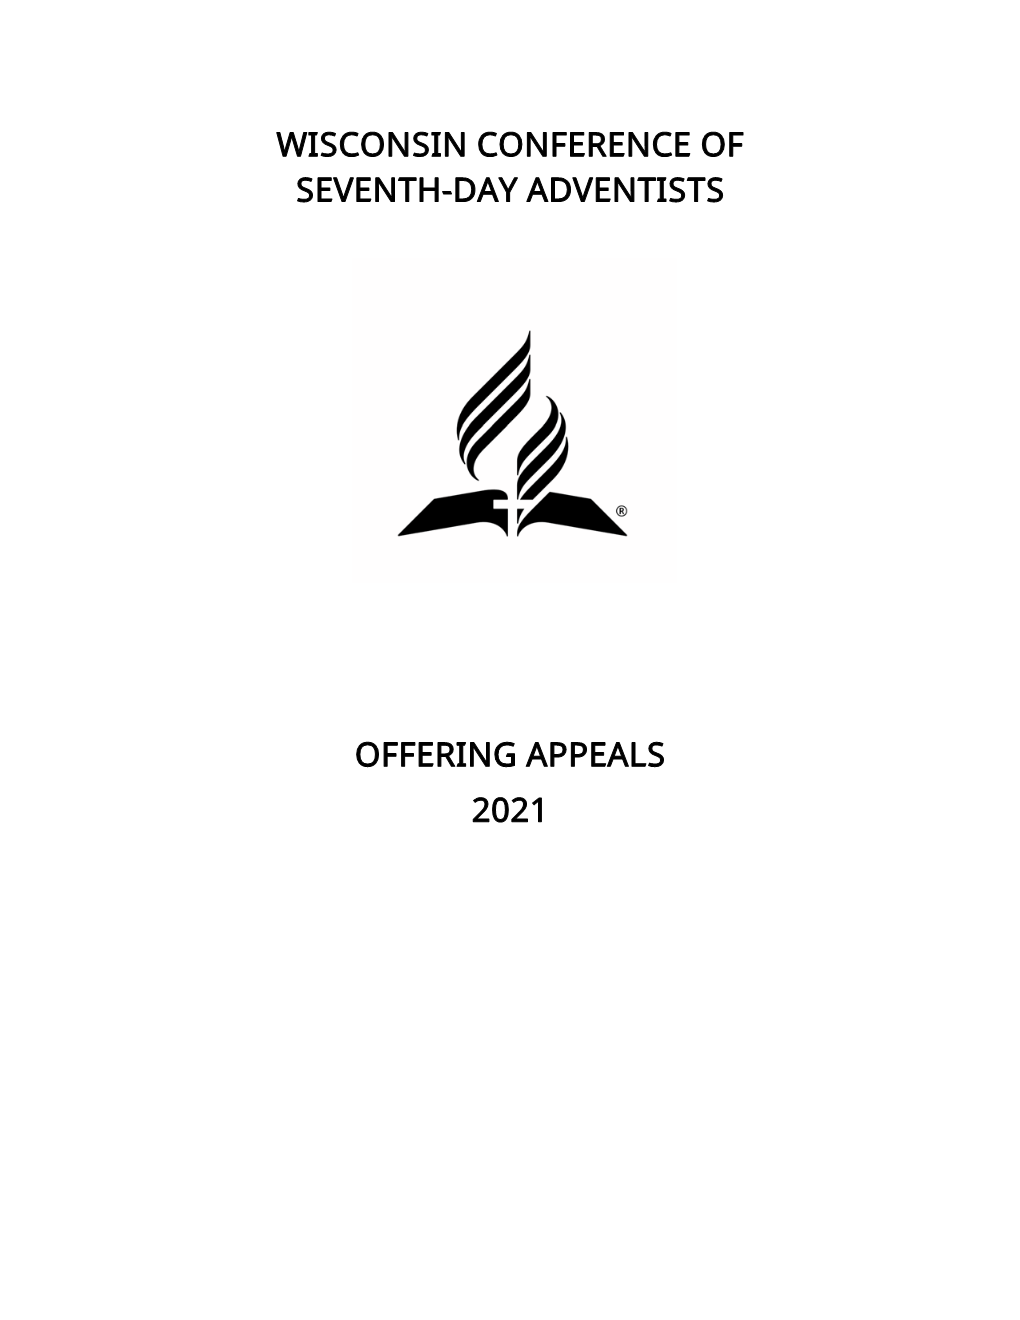 Wisconsin Conference of Seventh-Day Adventists